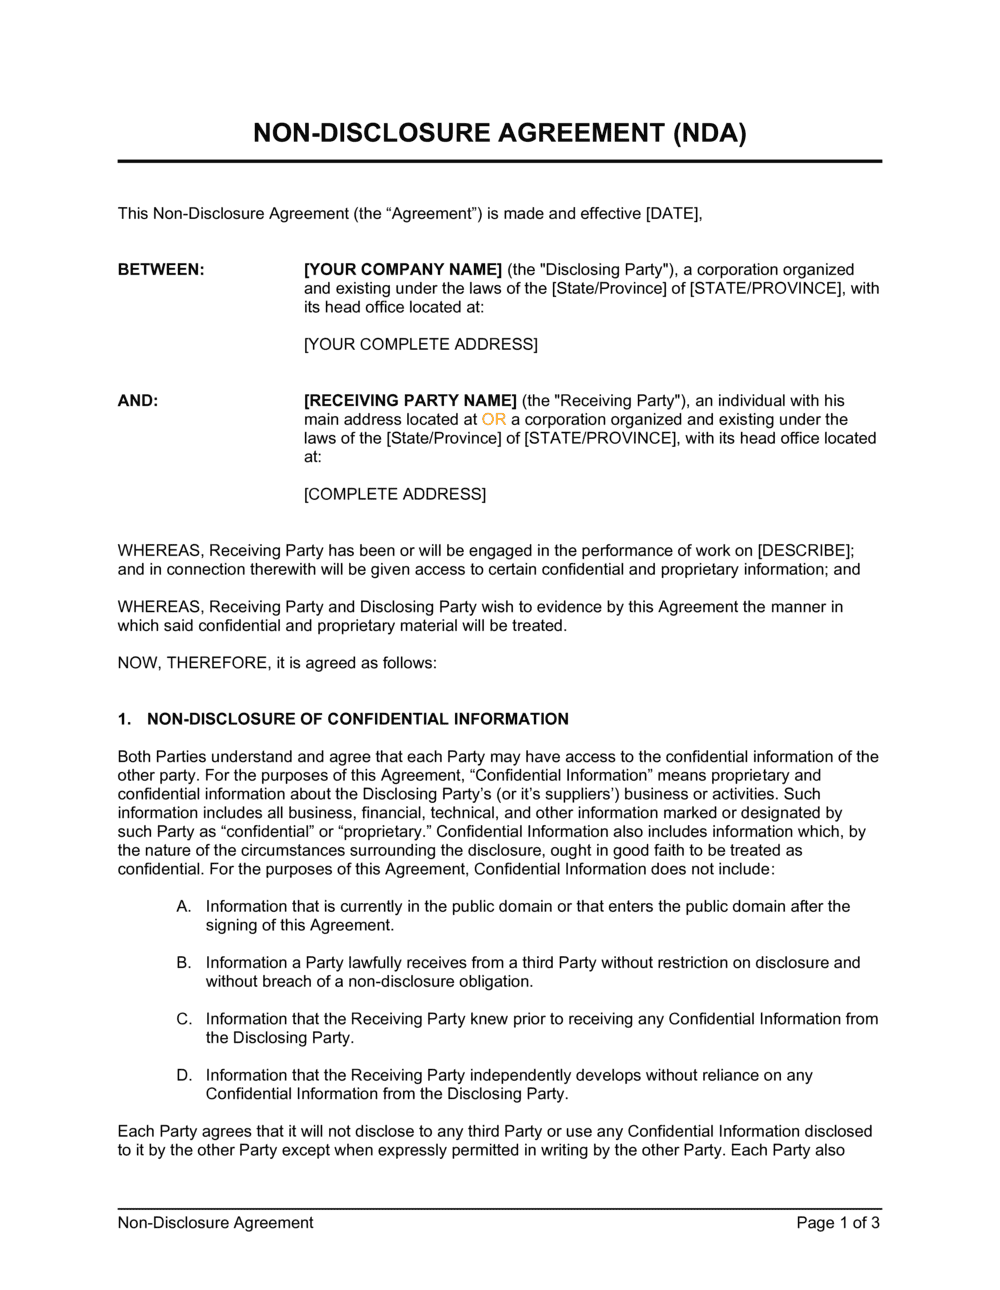 Non Disclosure Agreement Nda Template  by Business-in-a-Box™ For mutual non disclosure agreement template